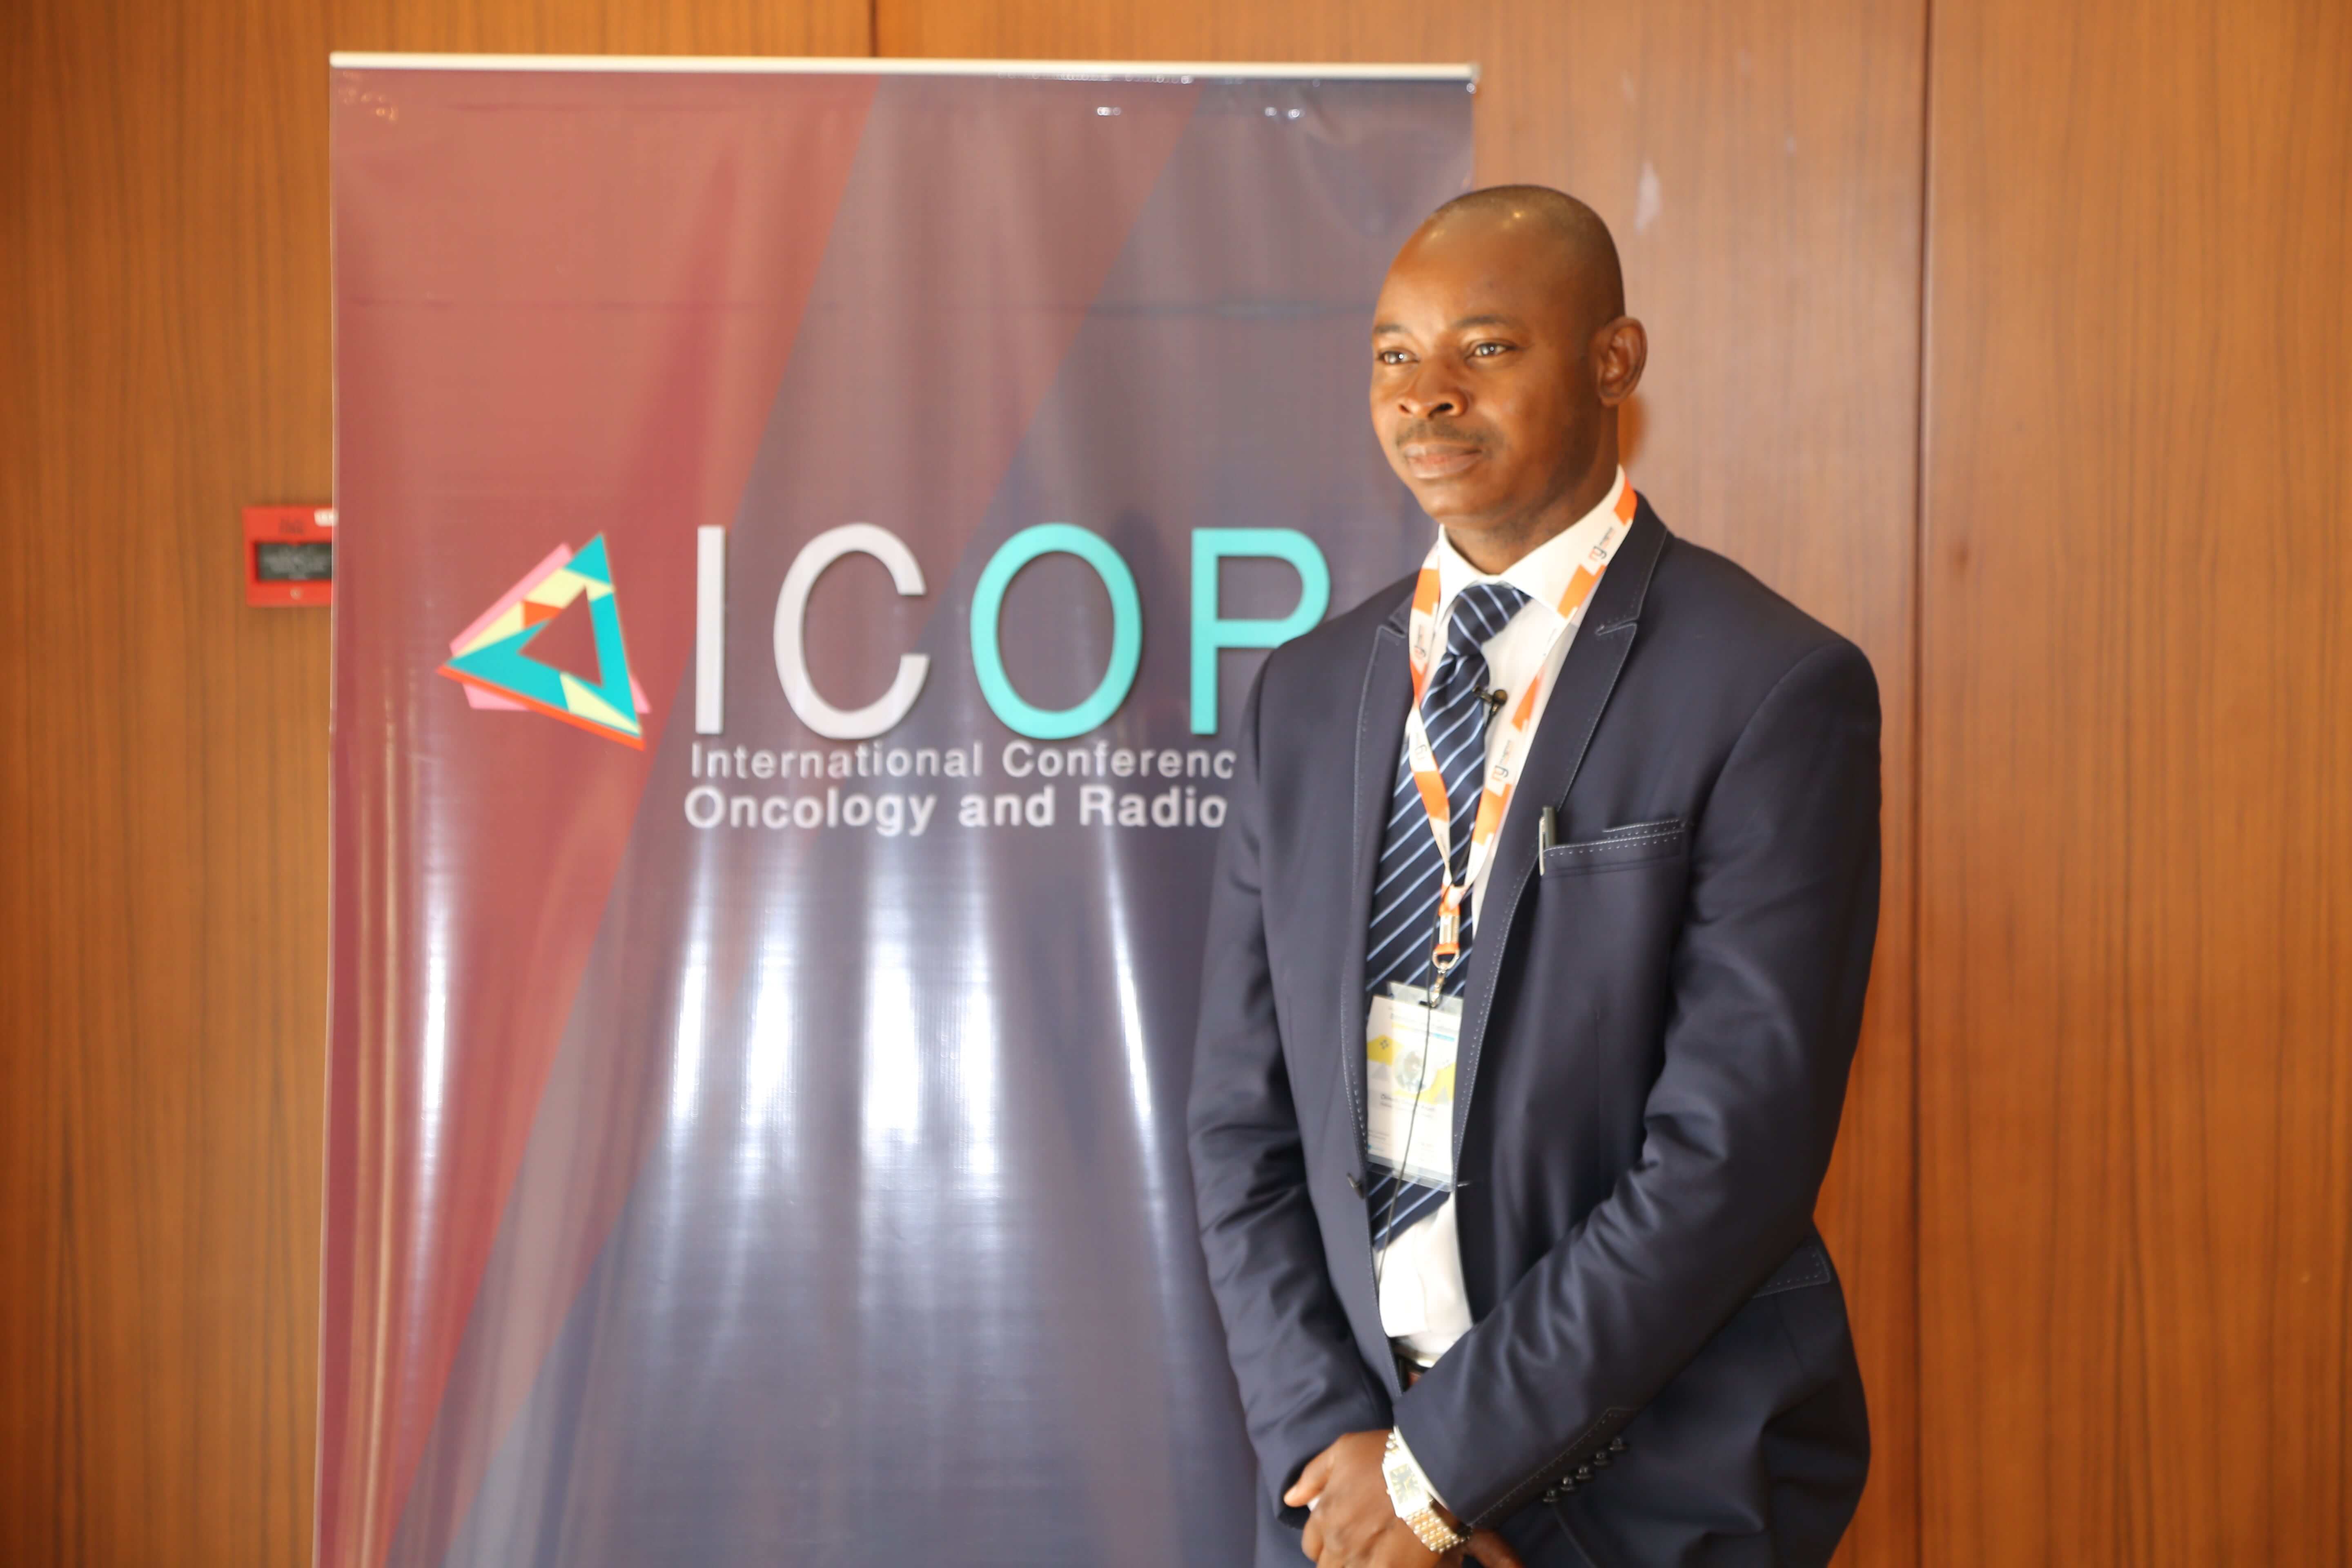 Cancer research conferences - Dr. Chinedu Simeon Aruah